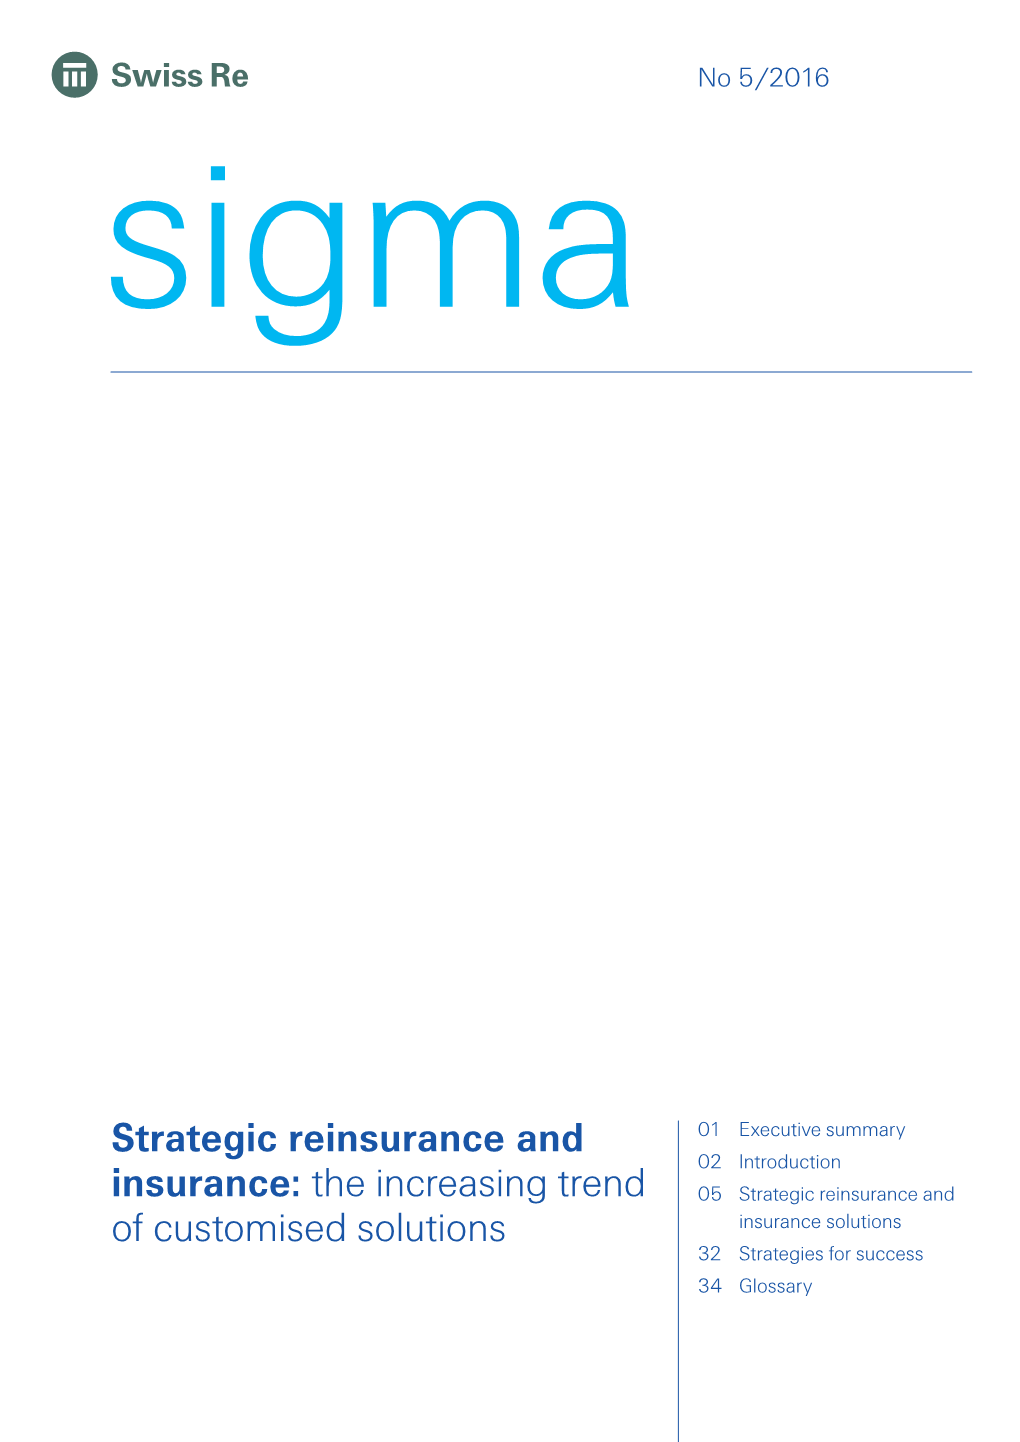 Strategic Reinsurance and Insurance Solutions